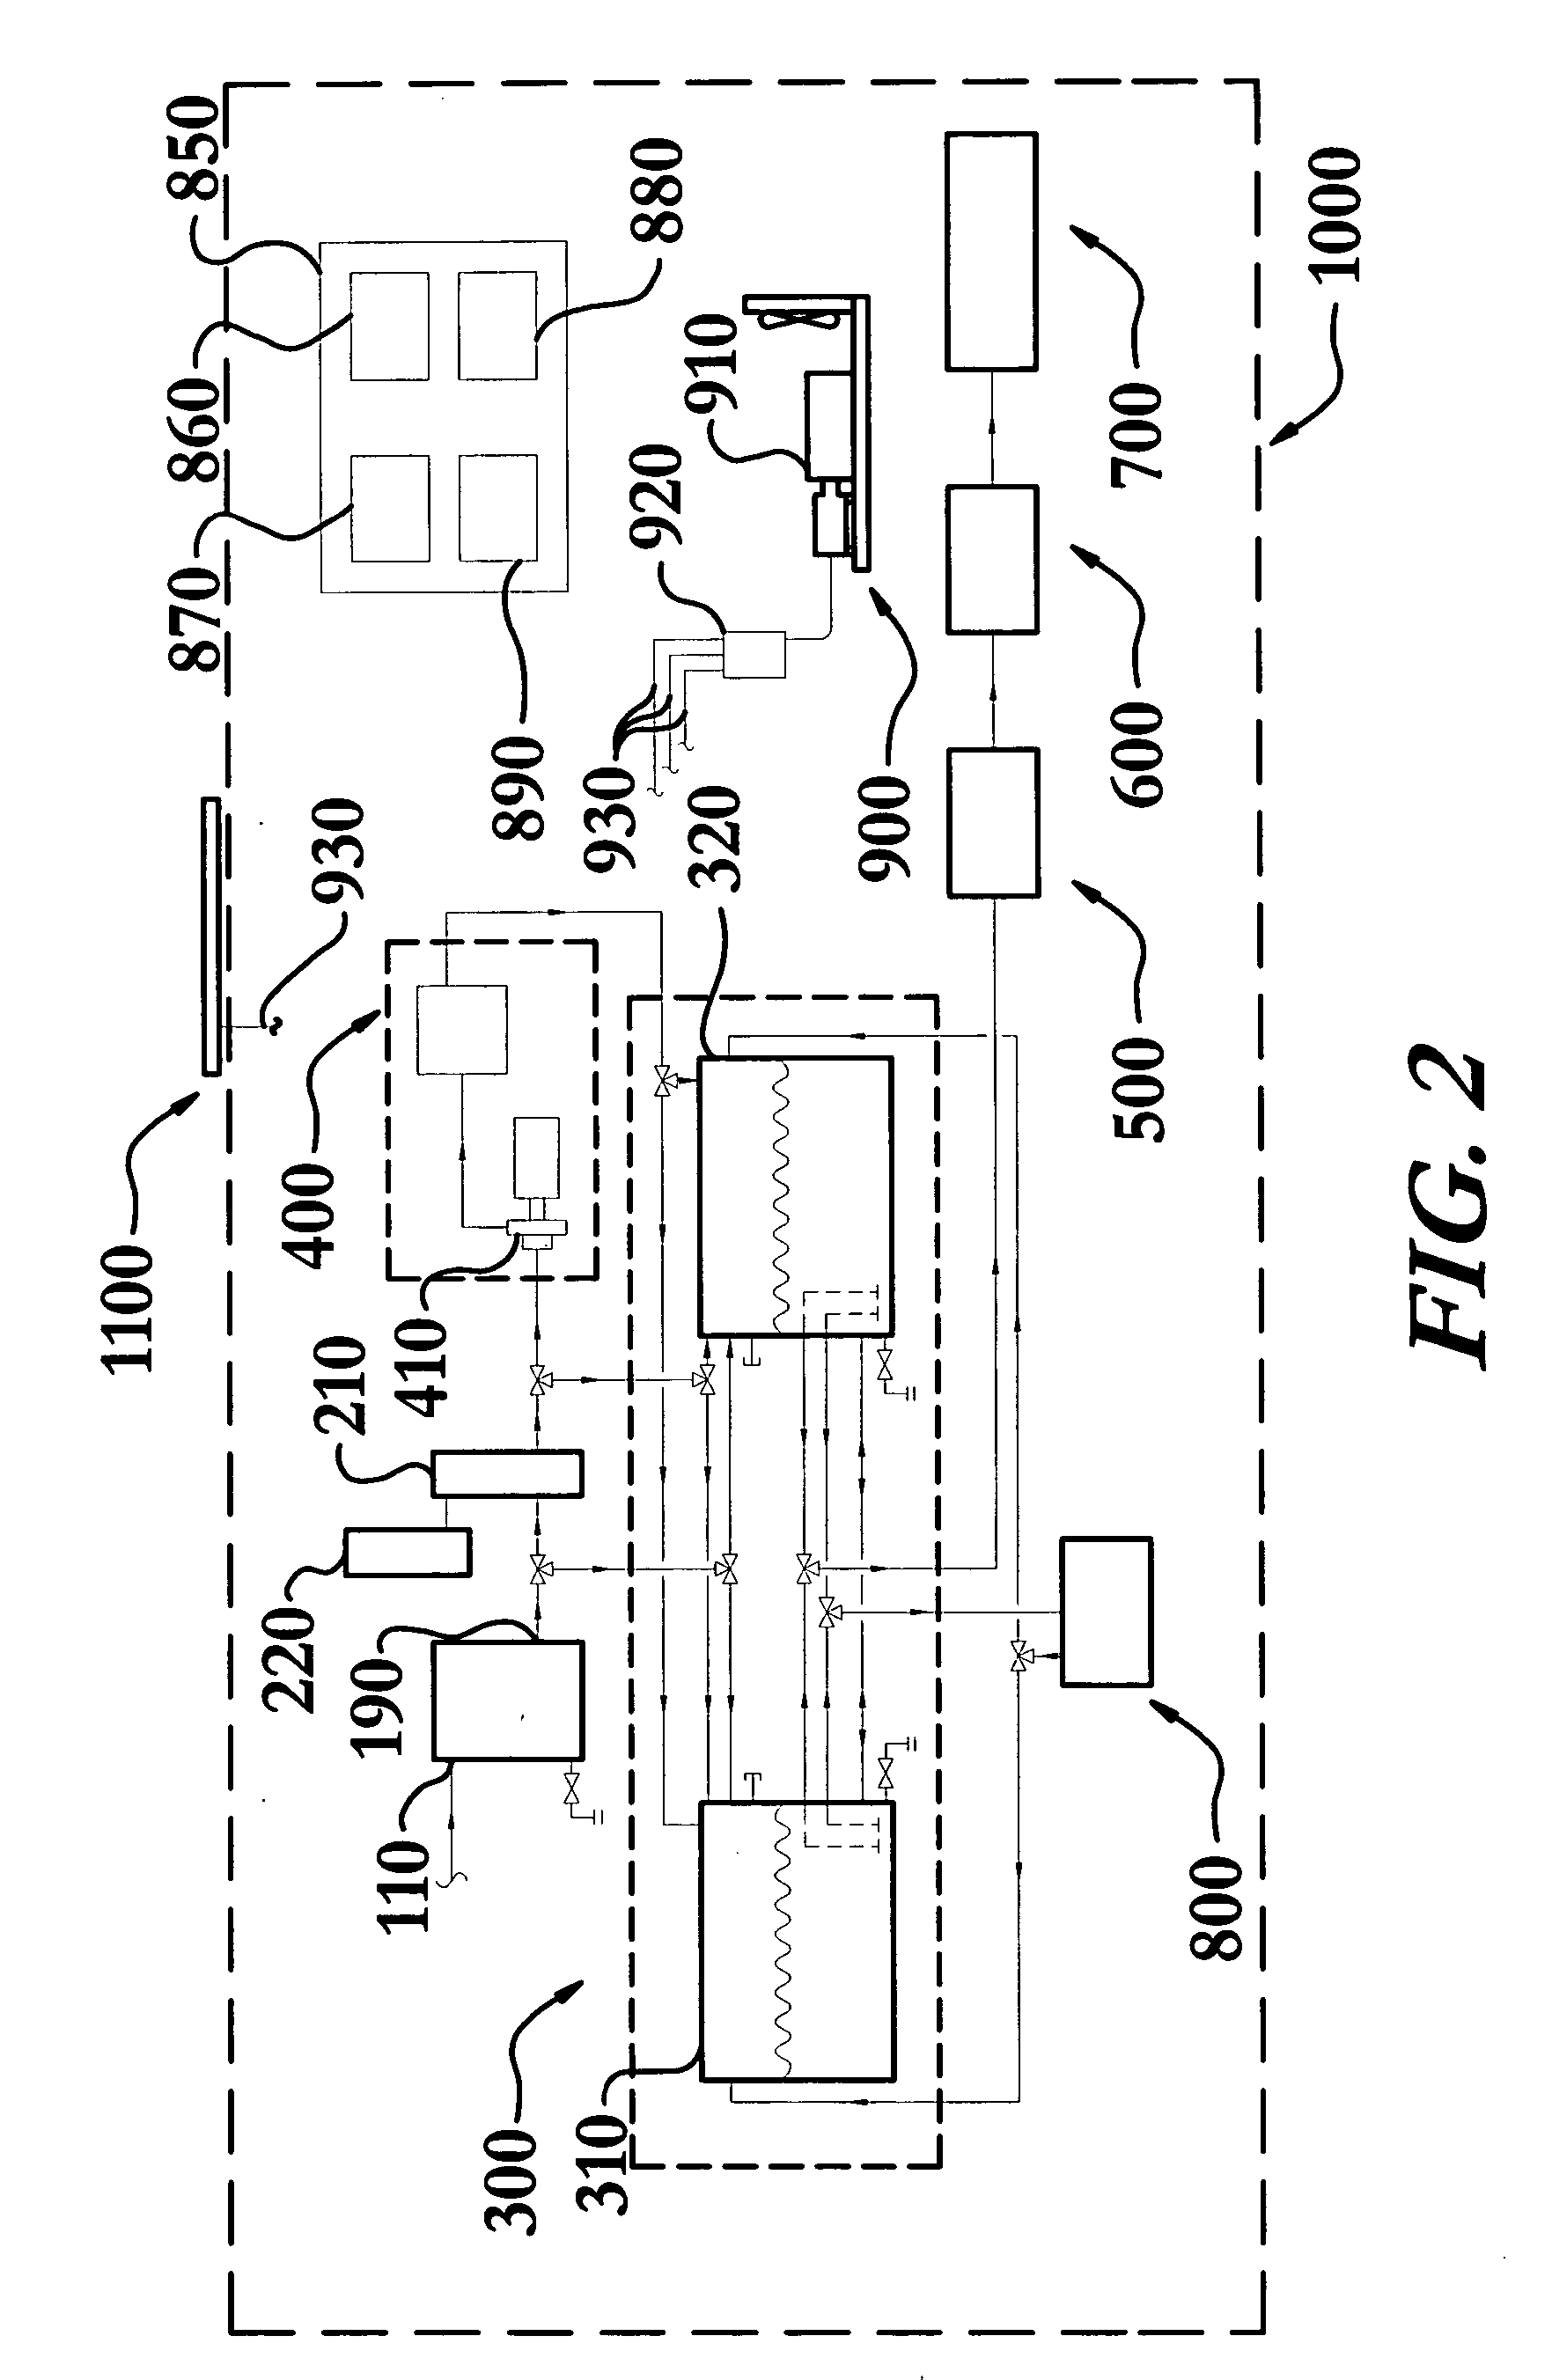 Mobile field electrical supply, water purification system, wash system, water collection, reclamation, and telecommunication apparatus